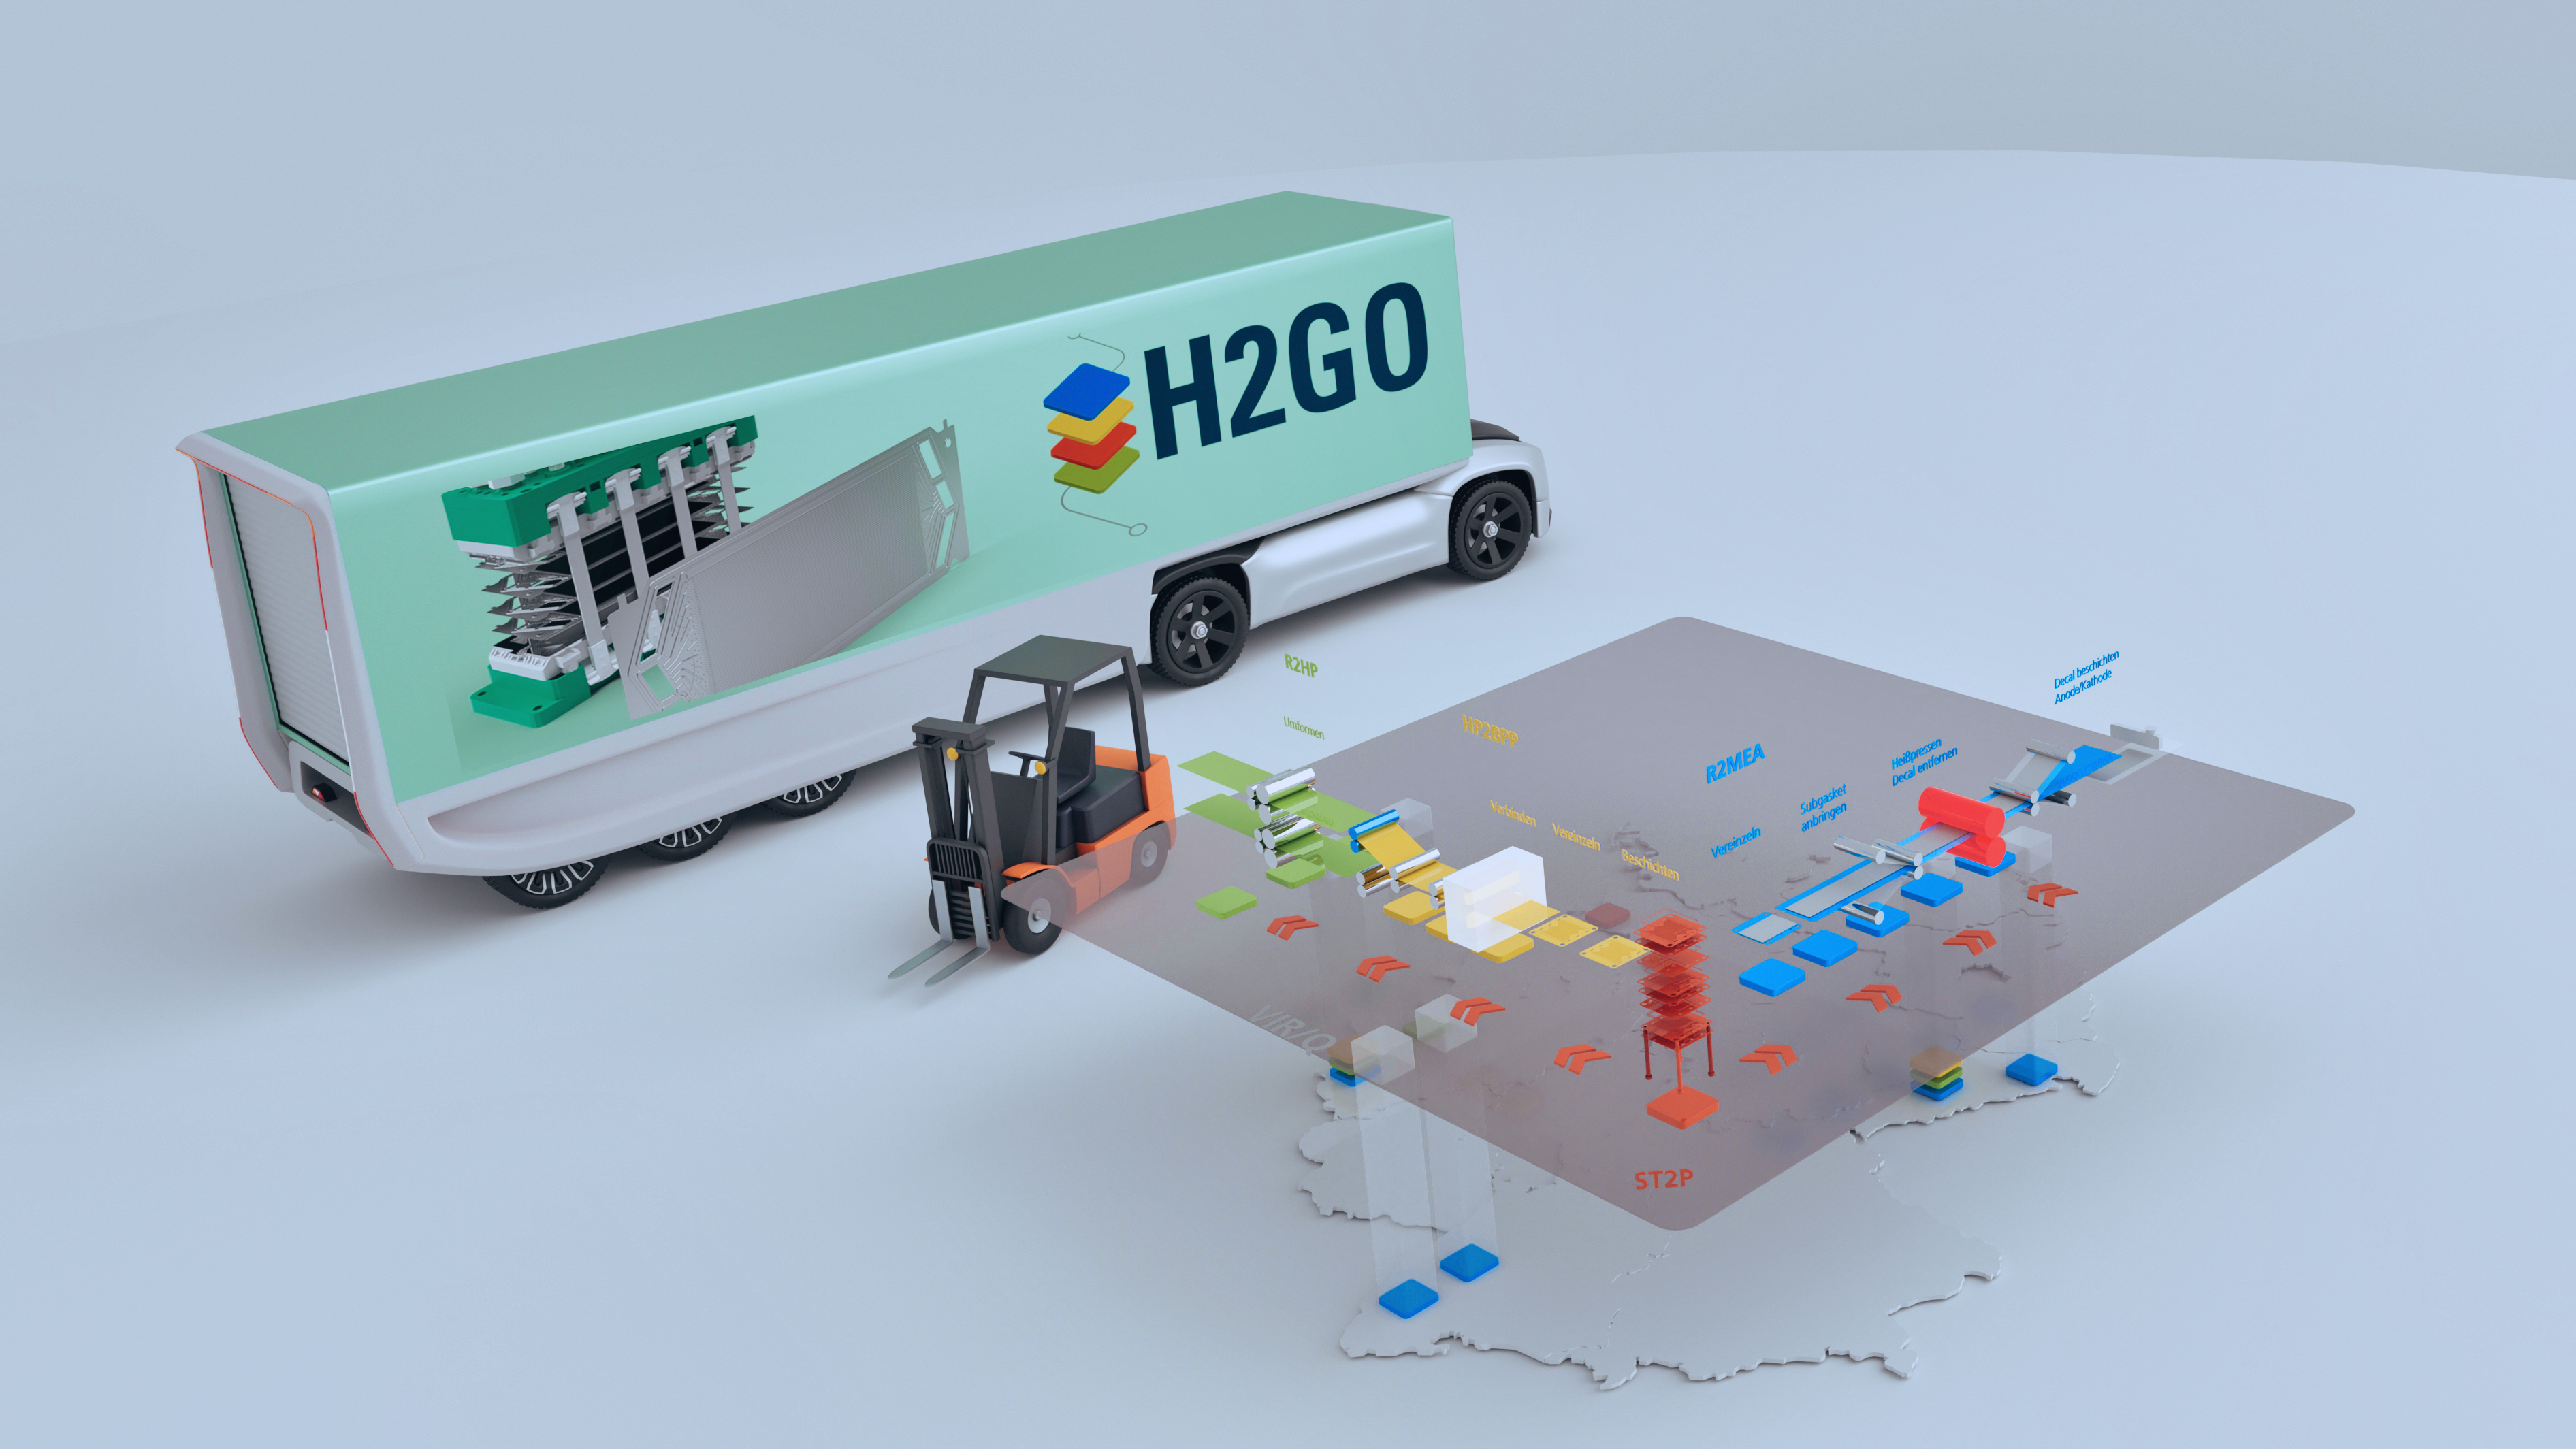 H2GO aims to significantly reduce CO2 emissions in freight mobility. The focus is on the development and rollout of industrial technologies for the economical production of fuel cells, primarily for road-based heavy-duty transport.